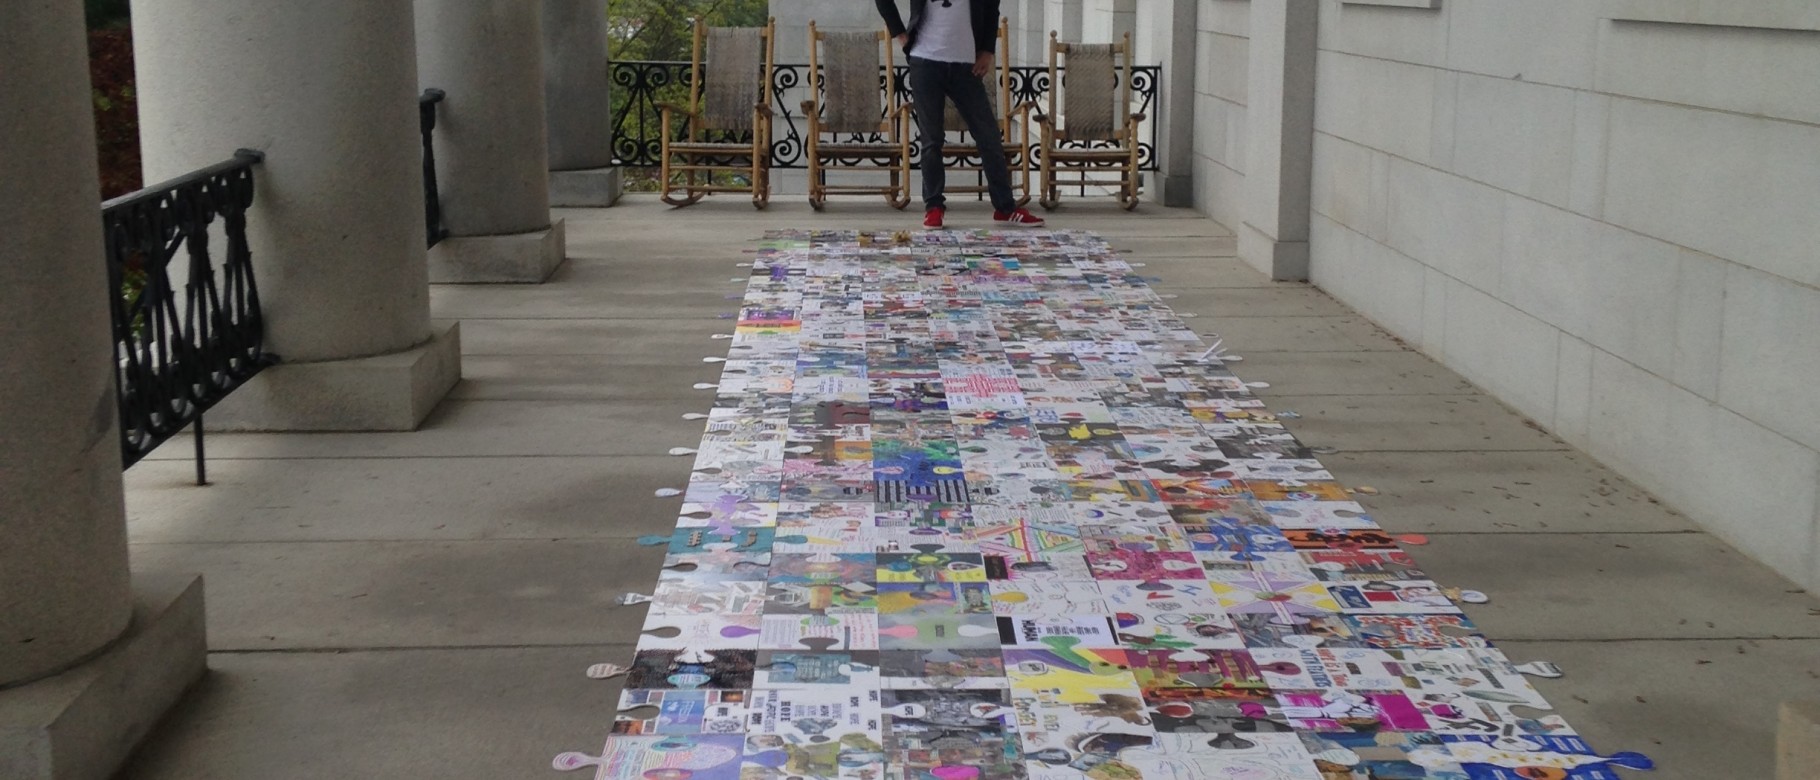 UNE graduate Glenn Simpson brought his recovery puzzle project to the Maine State House